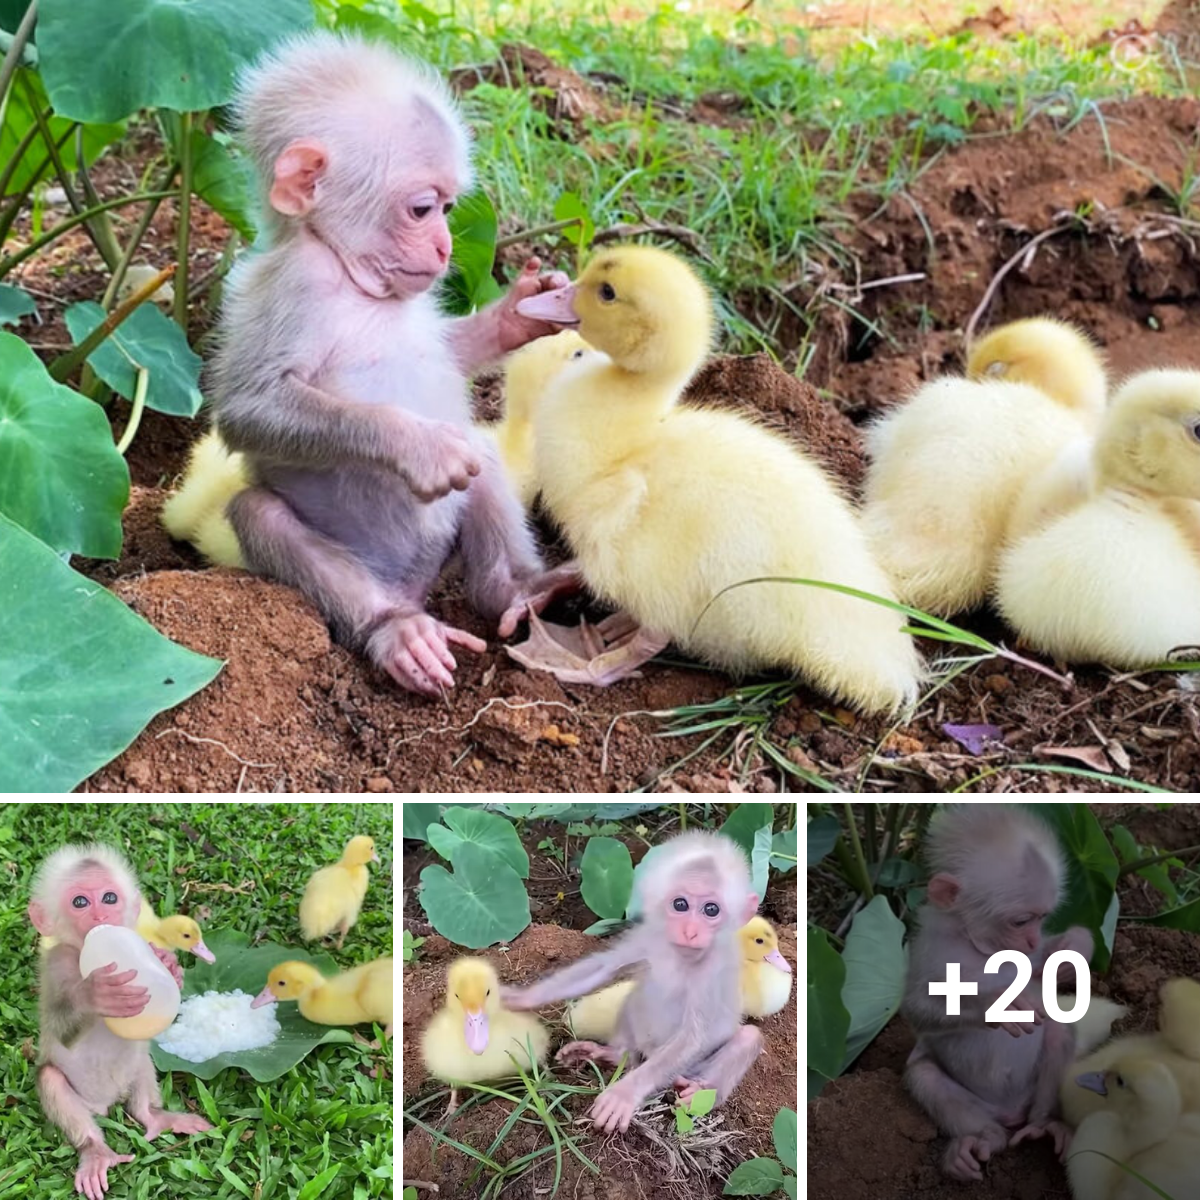 Adorable Baby Monkey Enjoys Taking Care of His Own Small Family Of Ducklings..